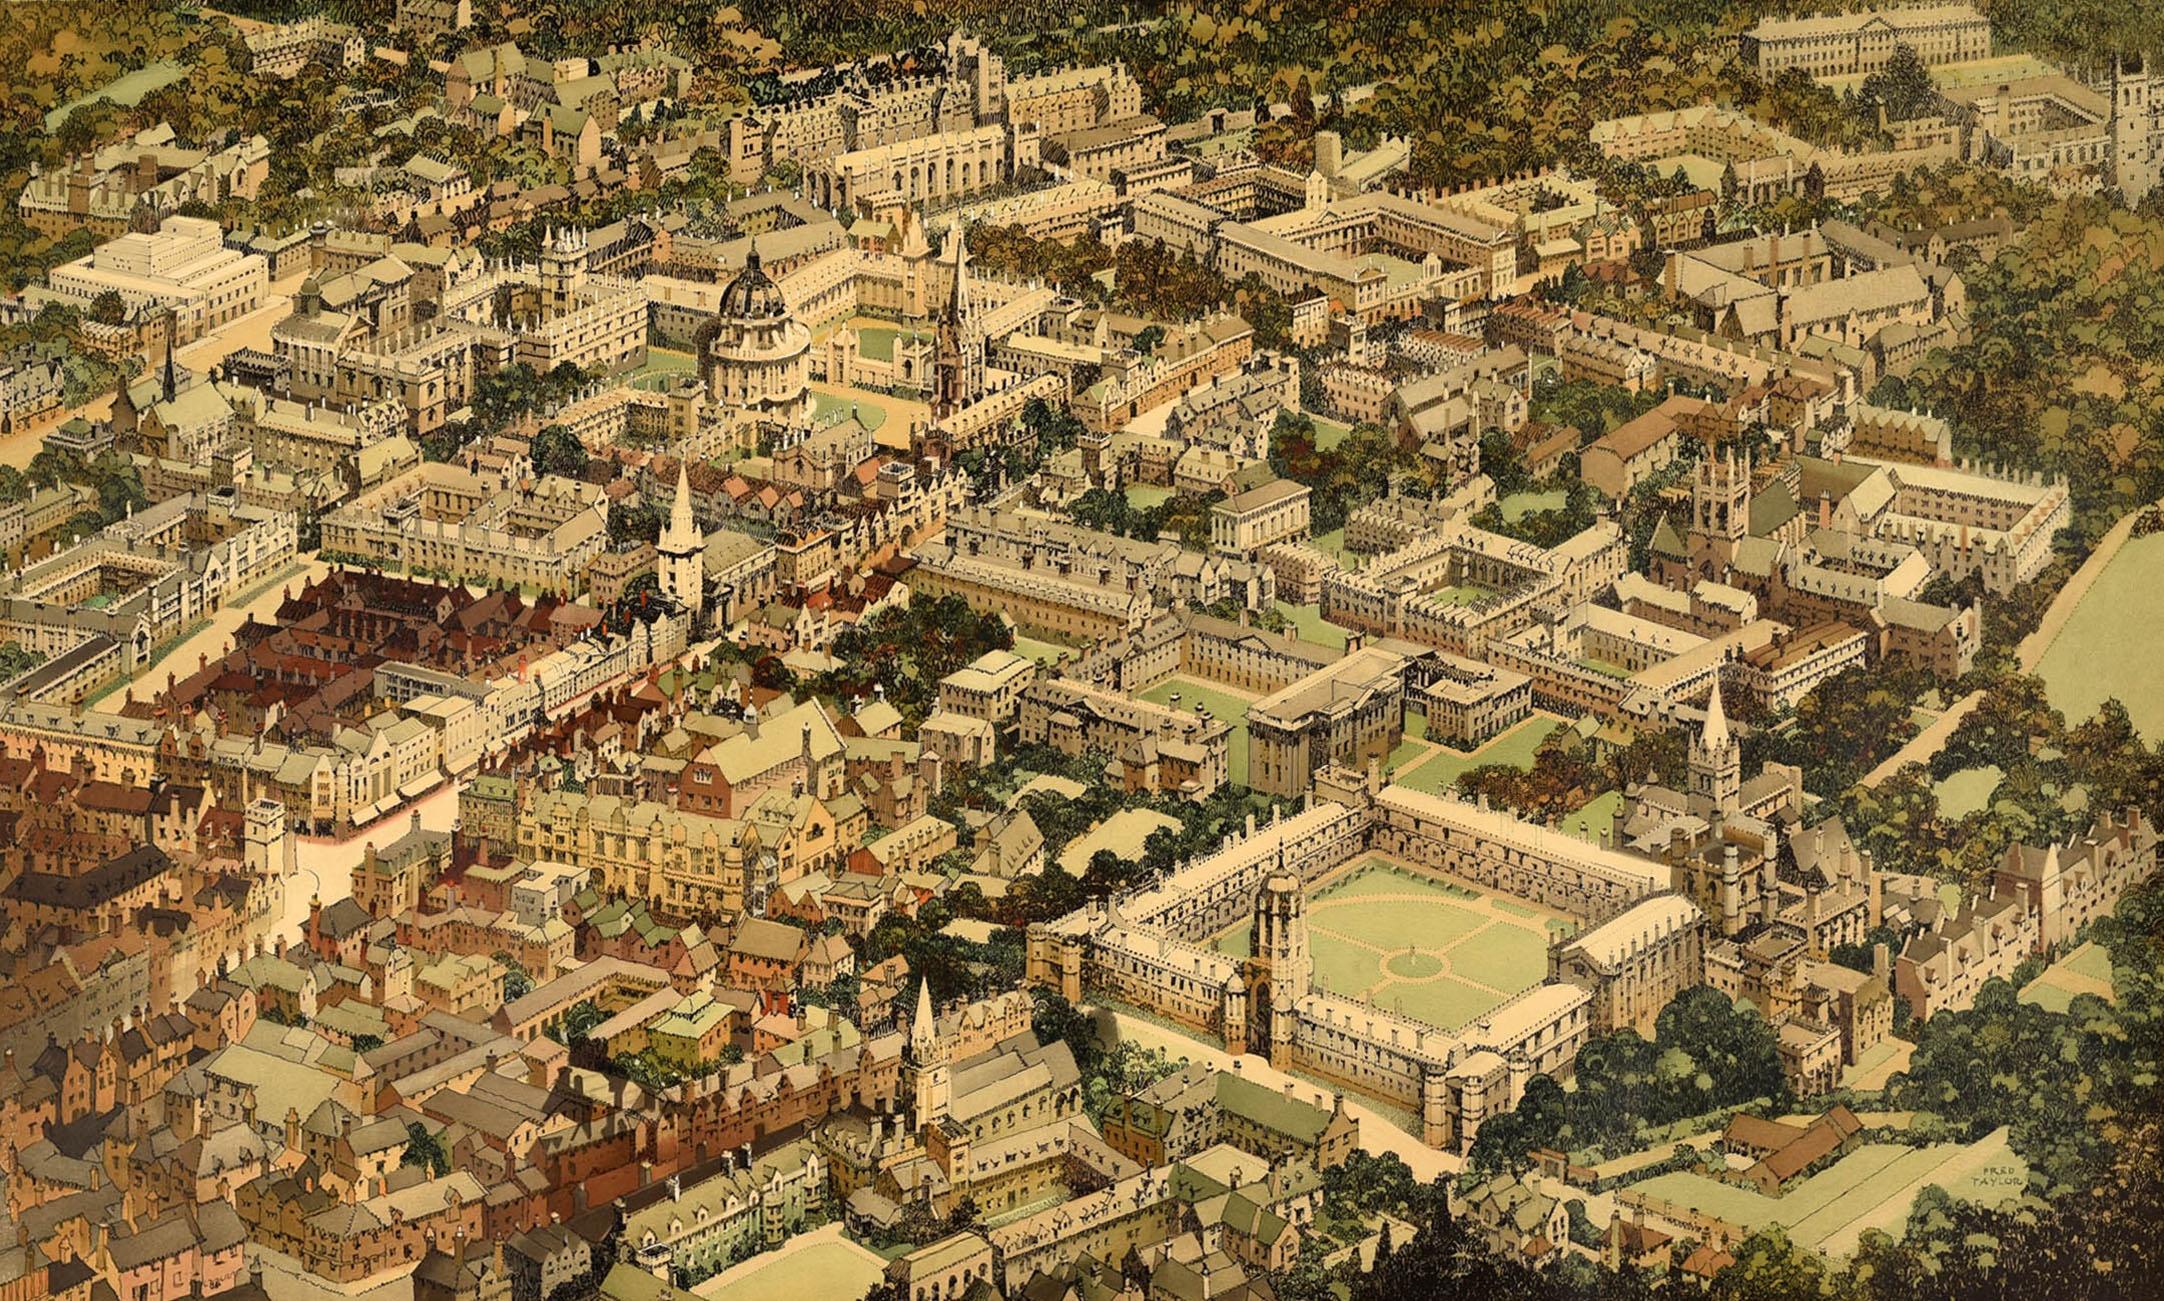 Original vintage railway poster published by British Railways - Oxford Travel by Train - featuring artwork by Fred Taylor (1875-1963) depicting an aerial map view of the city of Oxford including parks, the historic University of Oxford (founded